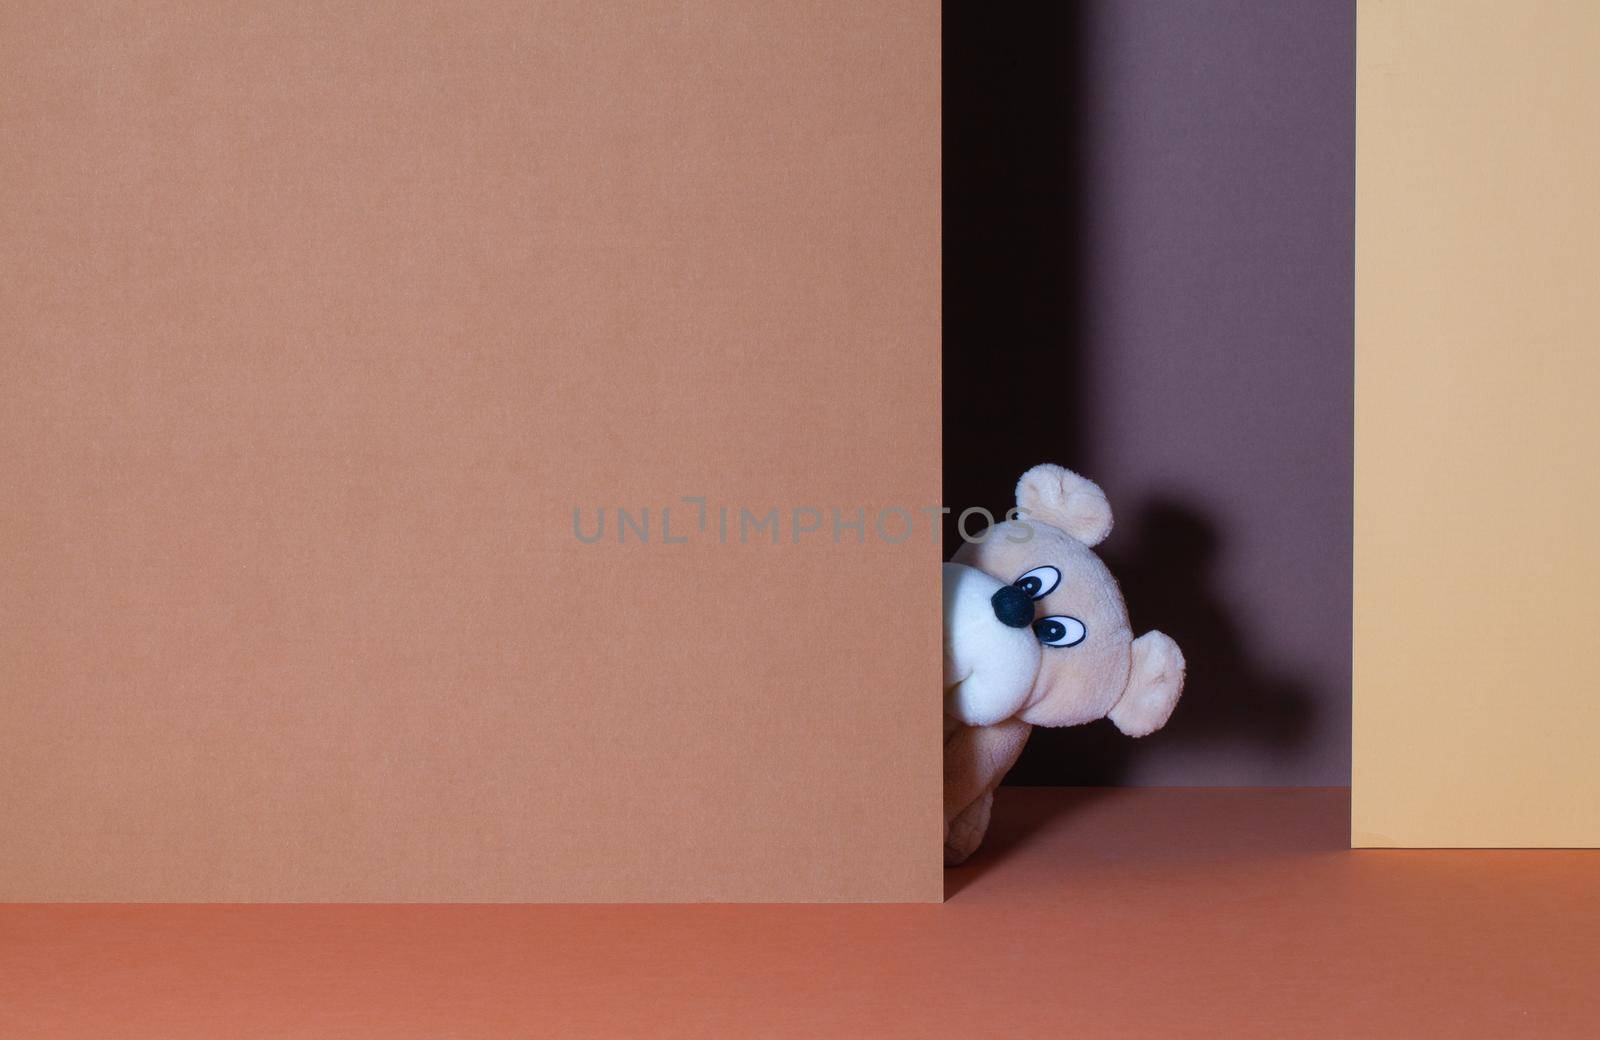 The cheerful plush dog among paper cartons by CaptureLight